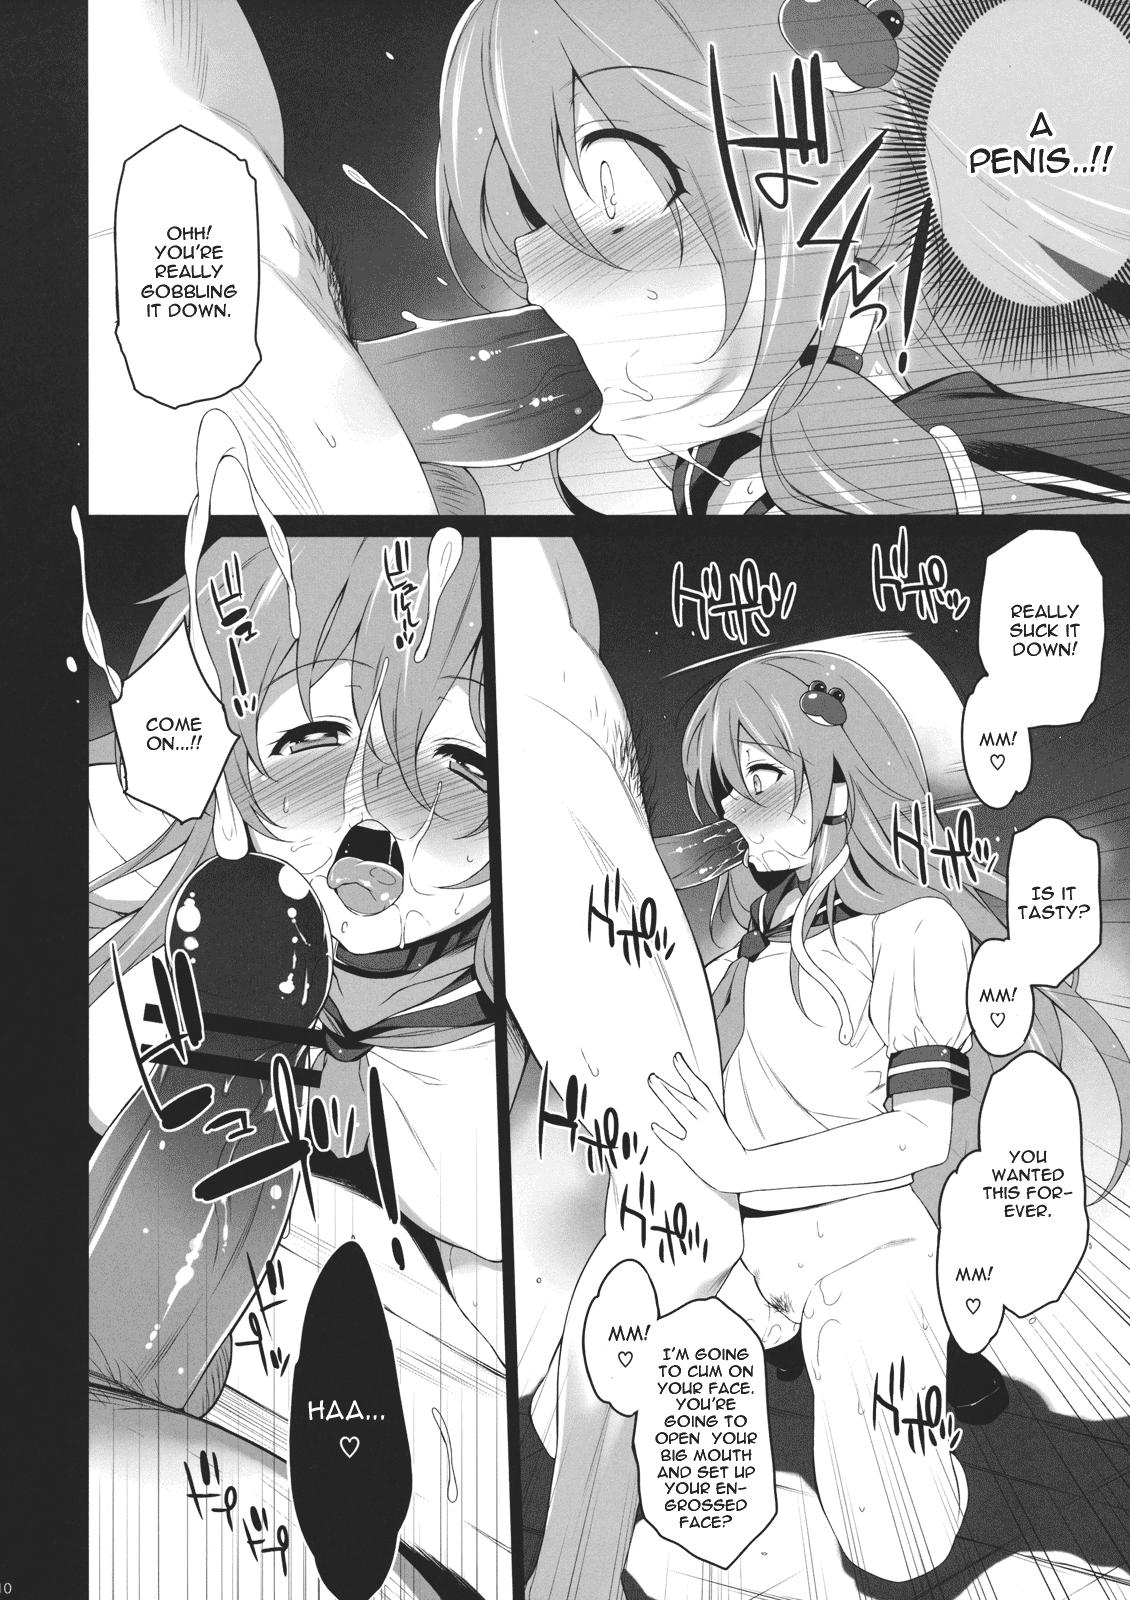 Girls Getting Fucked No.51 - Touhou project Teenage Porn - Page 10